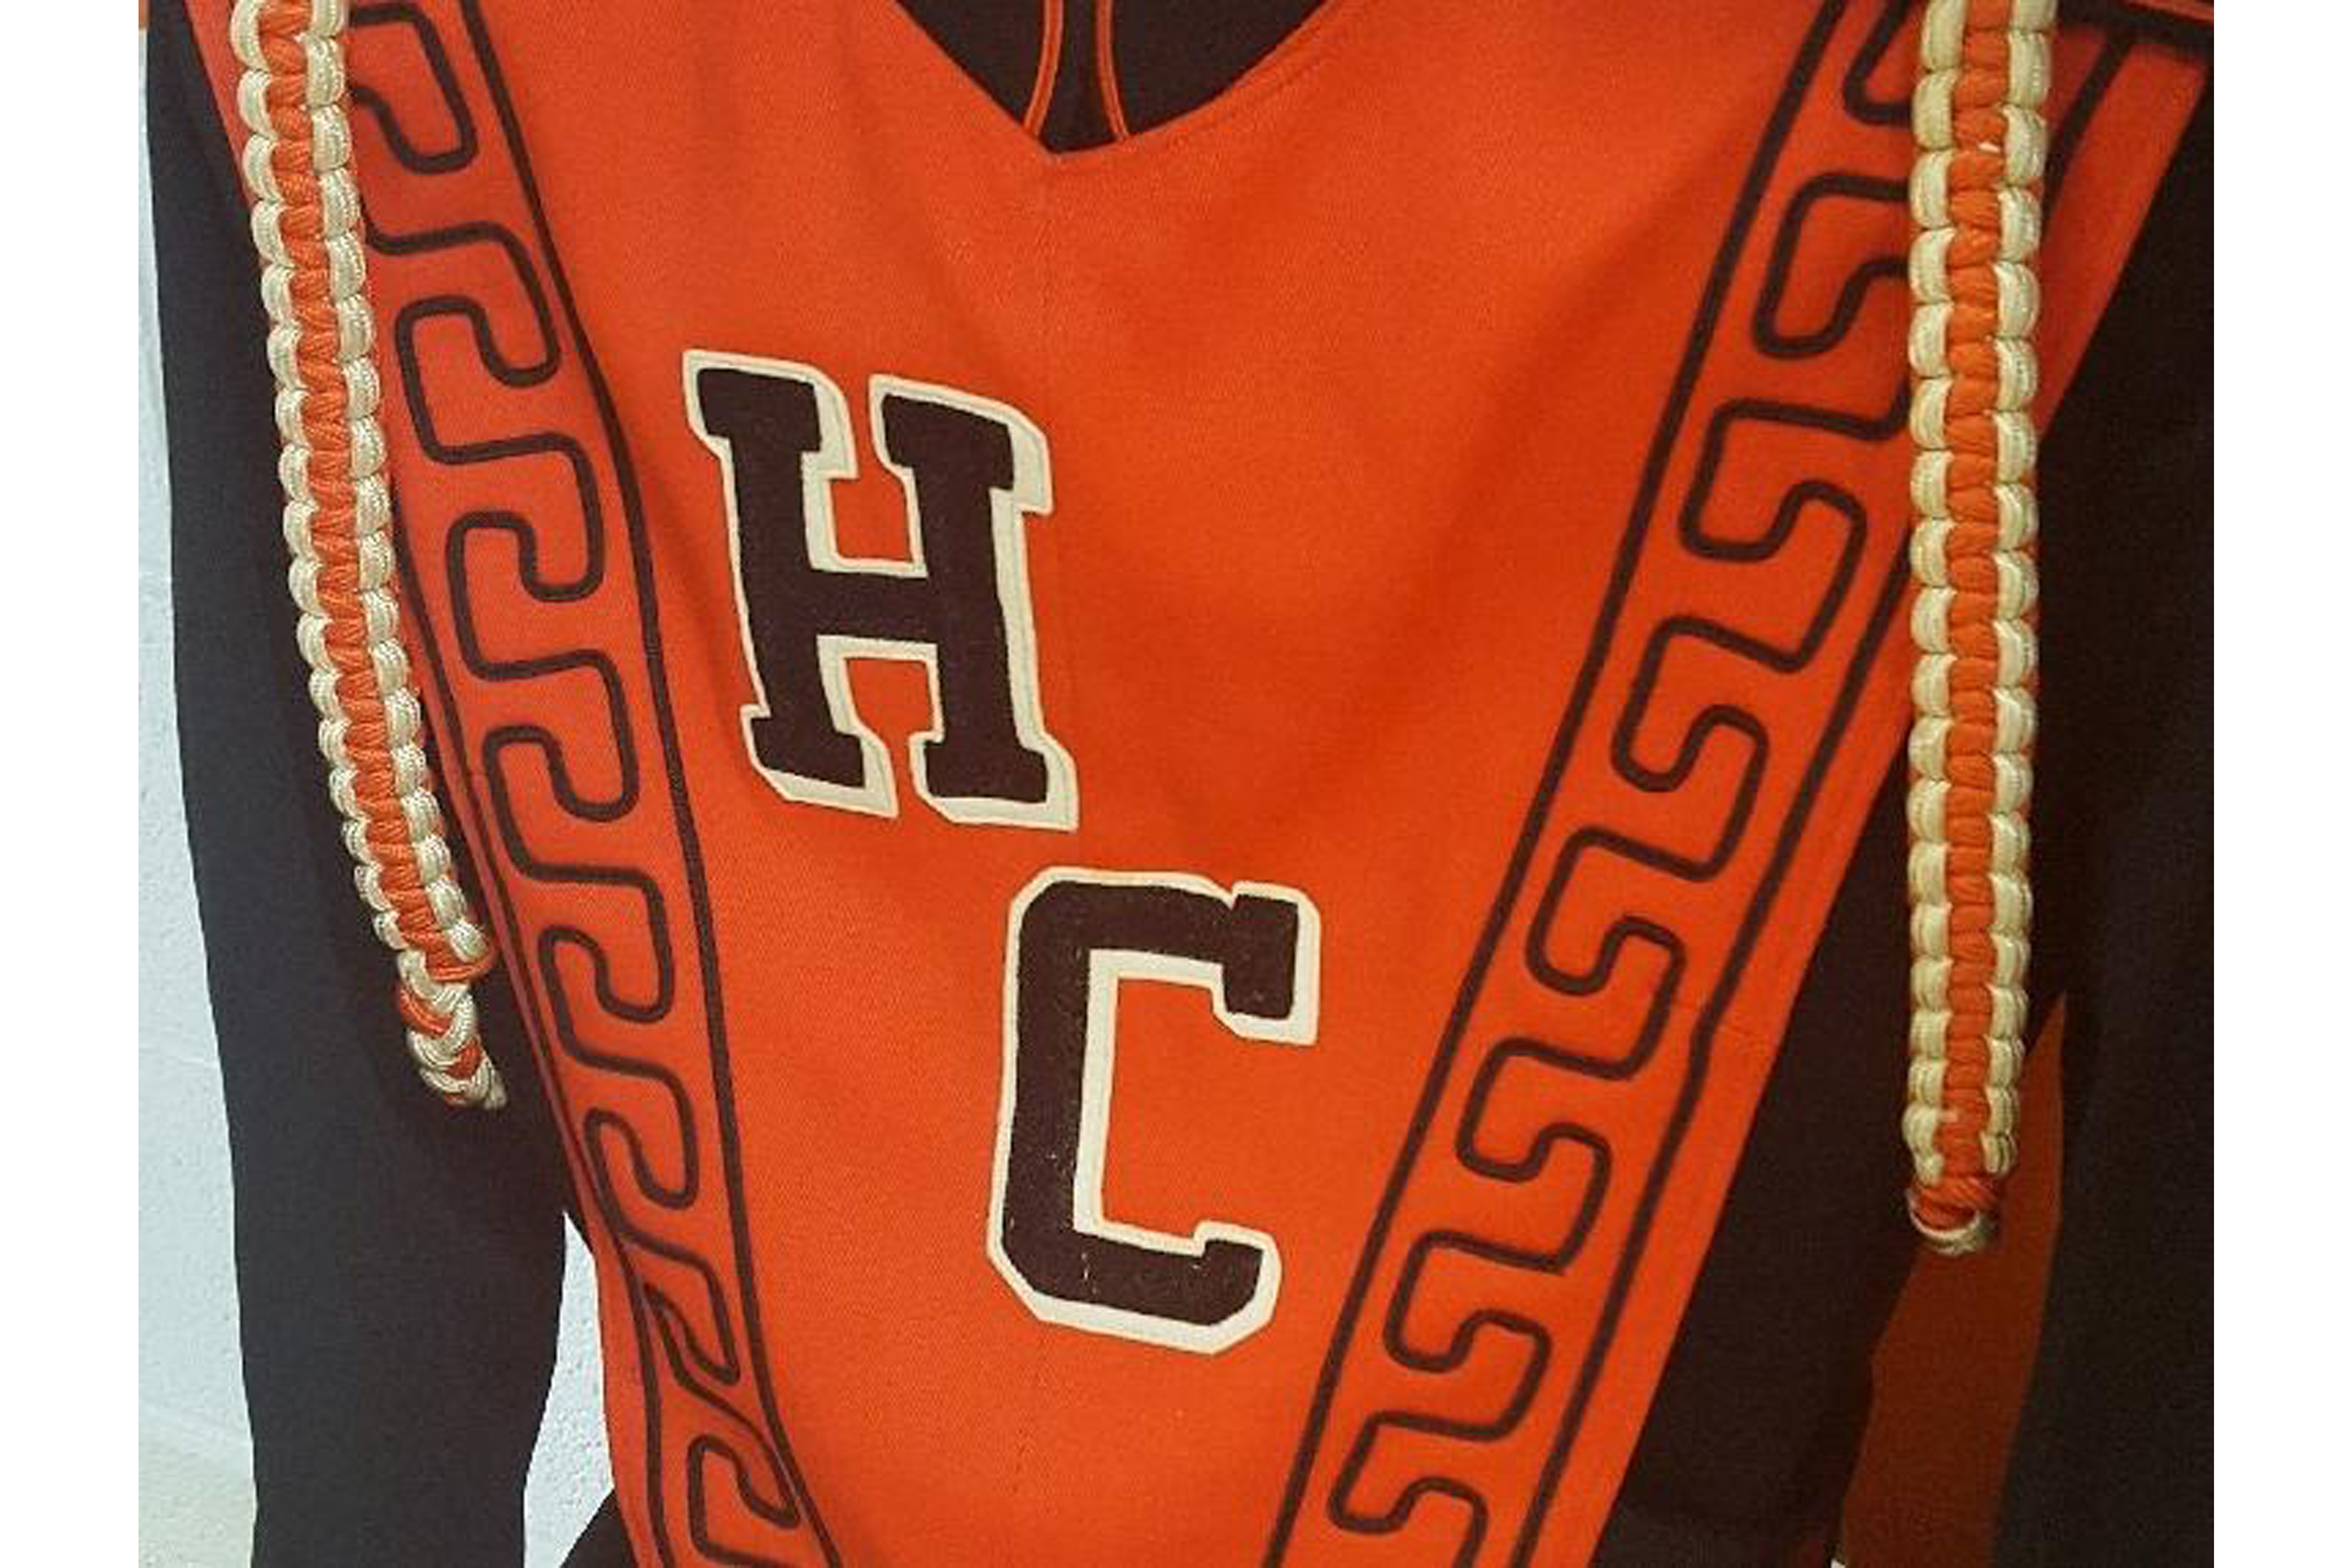 Band uniform with HC in black letter against orange fabric